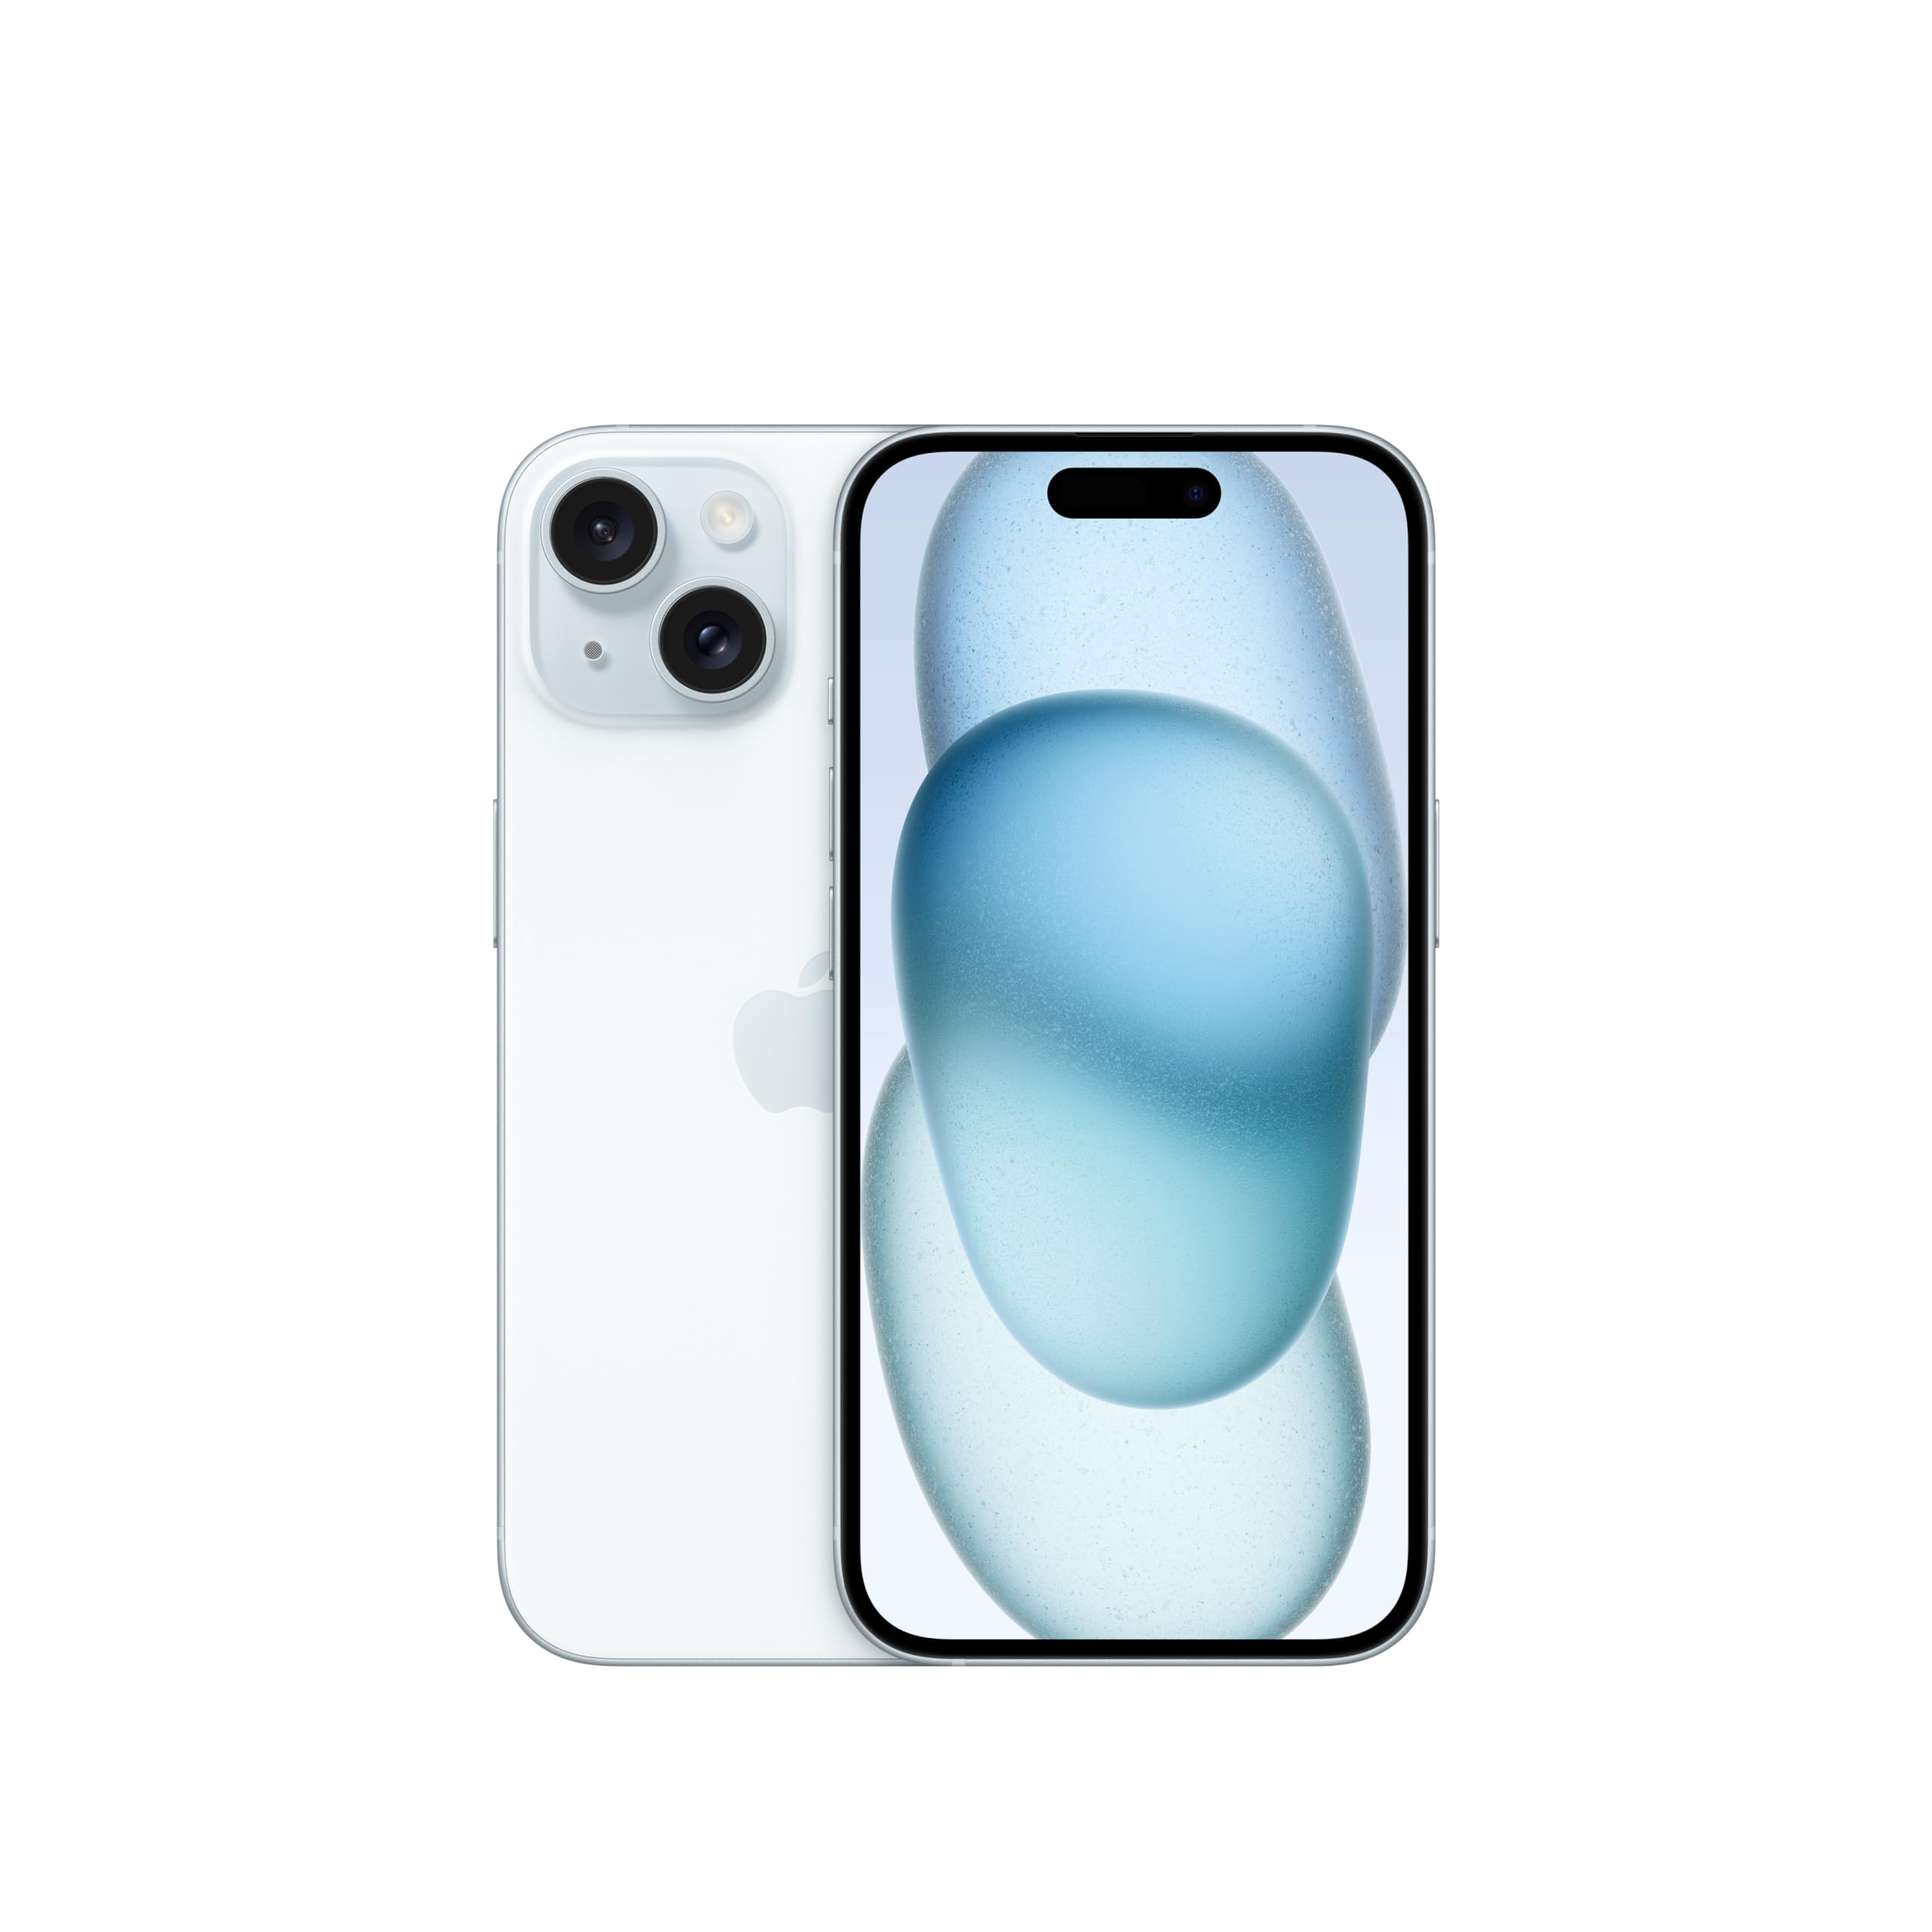 Apple iPhone 15 (128 GB) - Blue | | [Locked] | Boost Infinite plan required starting at $60/mo. | Unlimited Wireless | No trade-in needed to start | Get the latest iPhone every year